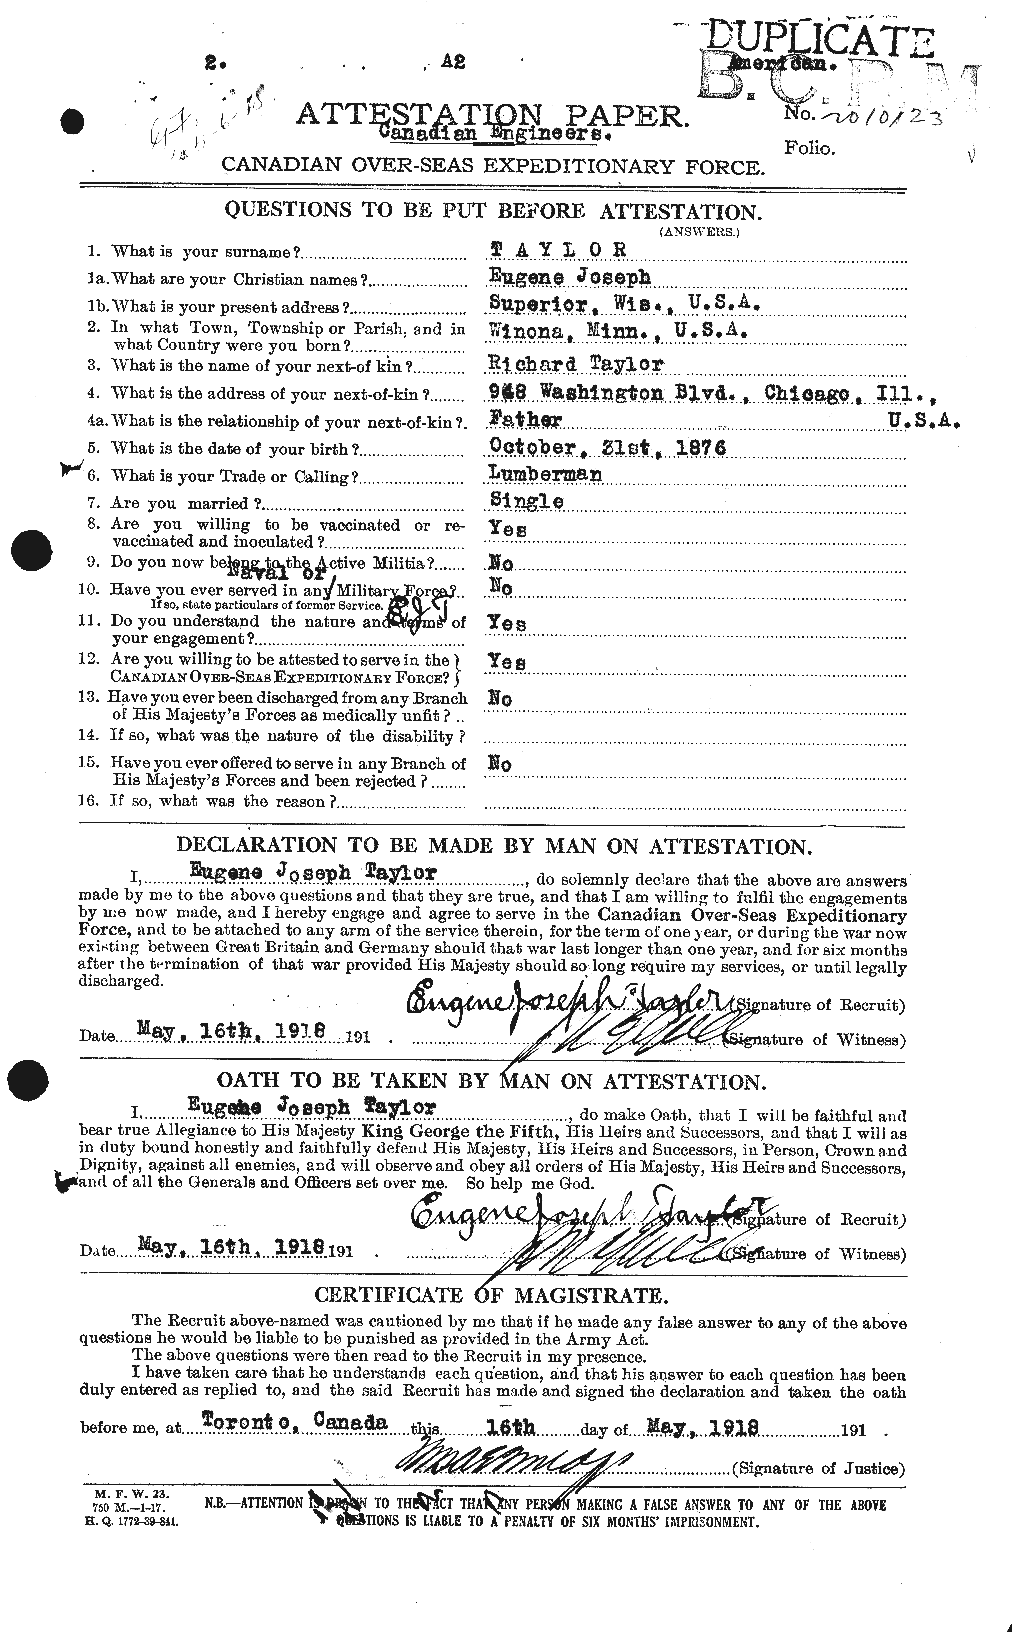 Personnel Records of the First World War - CEF 627409a